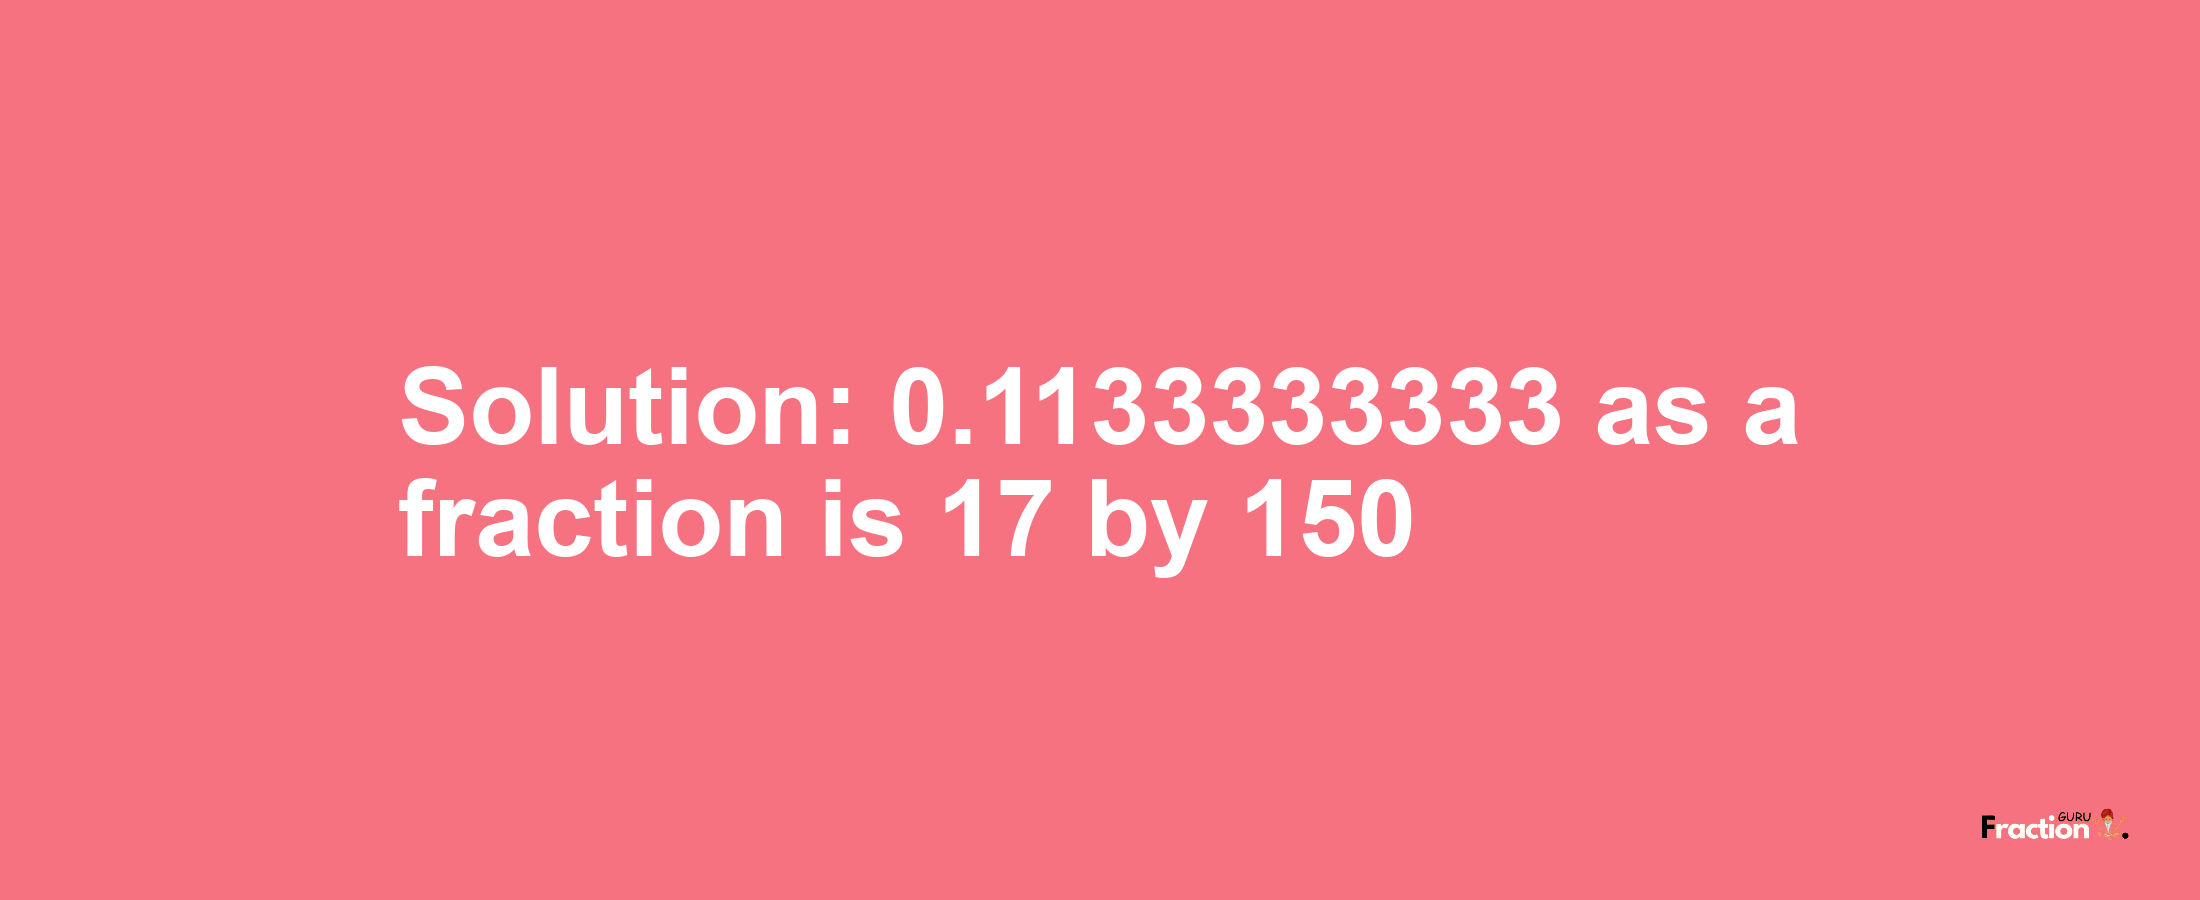 Solution:0.1133333333 as a fraction is 17/150